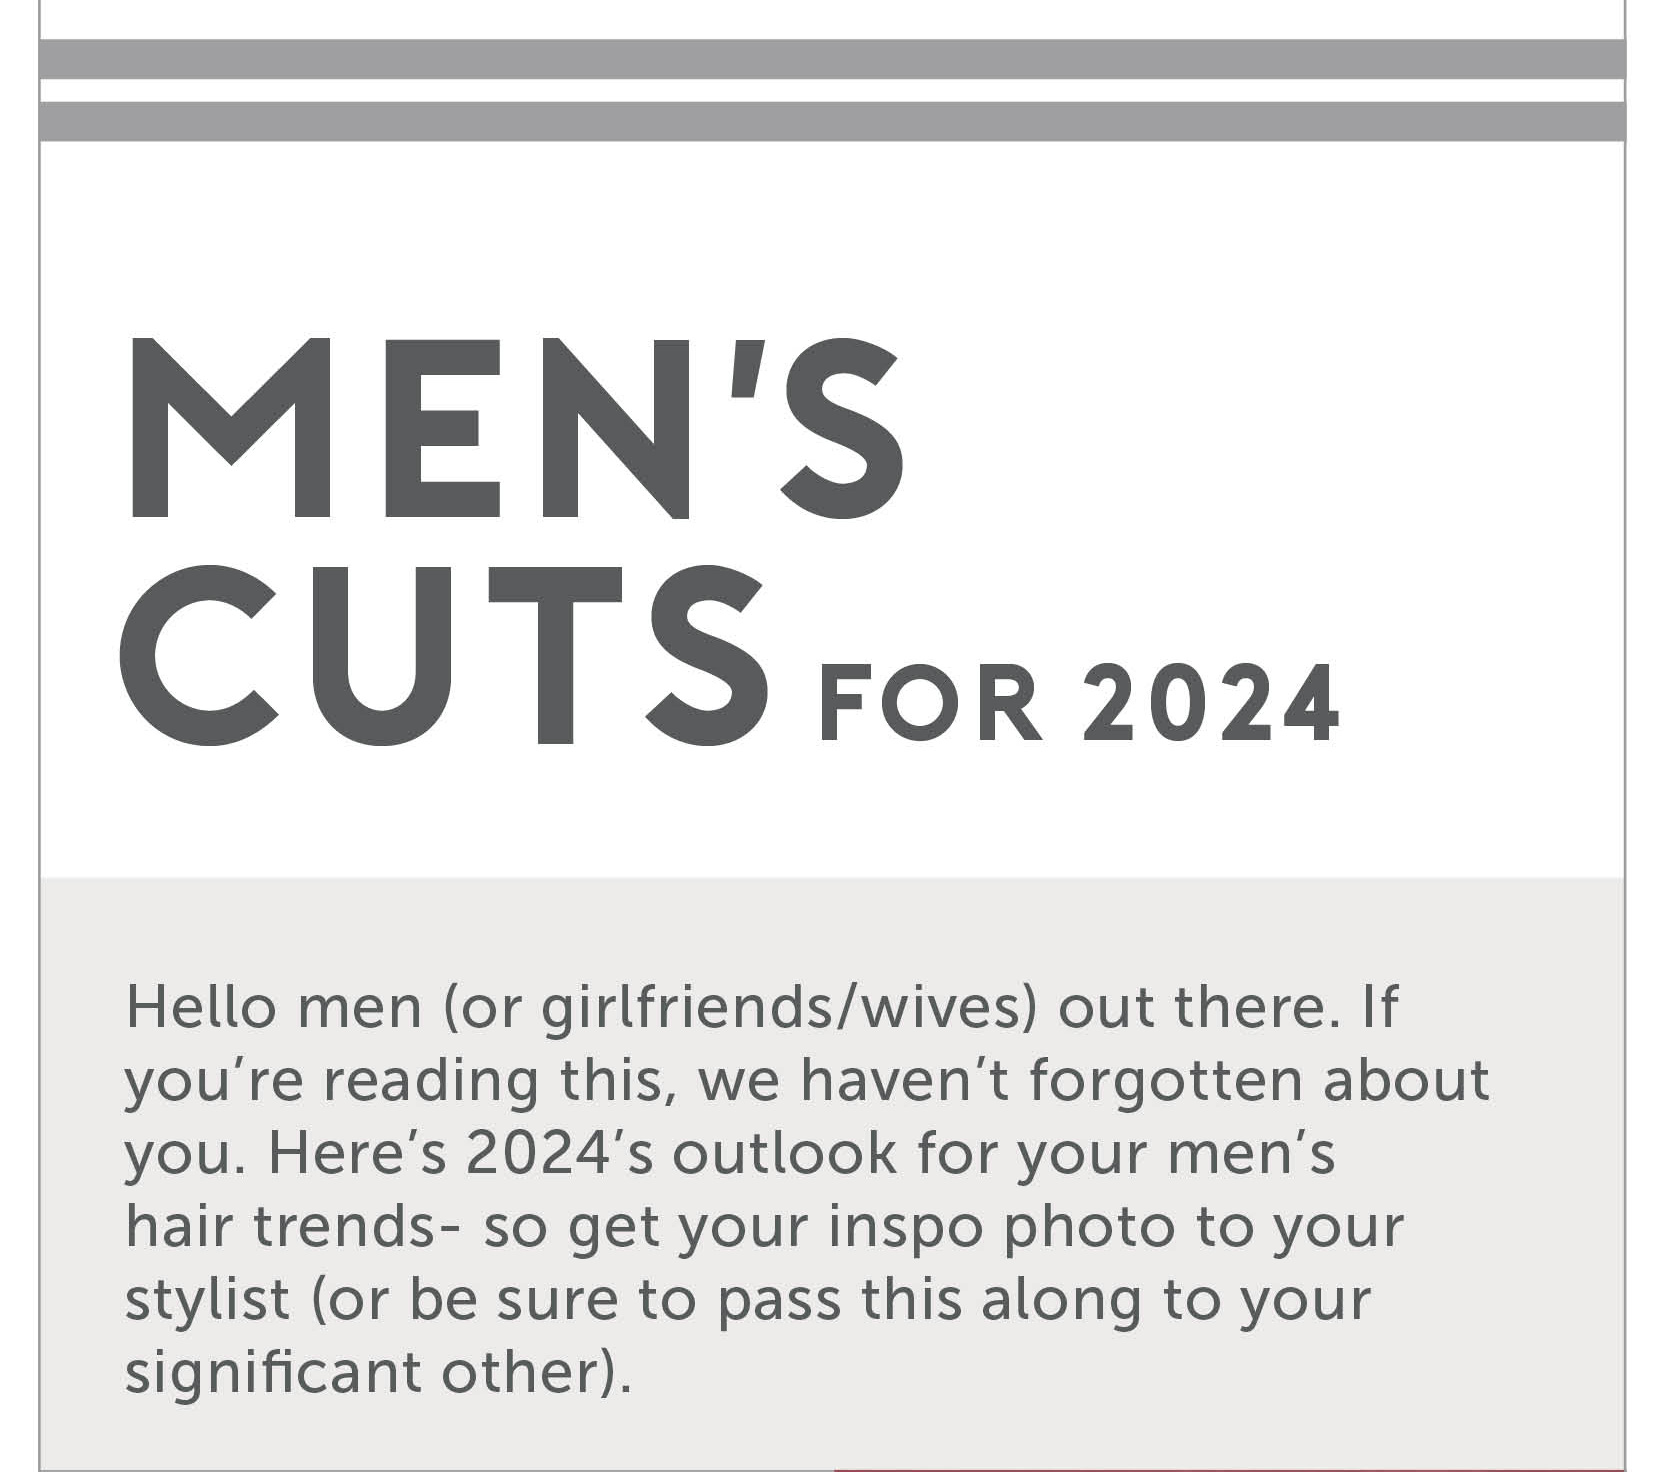 Men’s Cuts for 2024

Hello men (or girlfriends/wives) out there. If you’re reading this, we haven’t forgotten about you. Here’s 2024’s outlook for your men’s hair trends- so get your inspo photo to your stylist (or be sure to pass this along to your significant other).